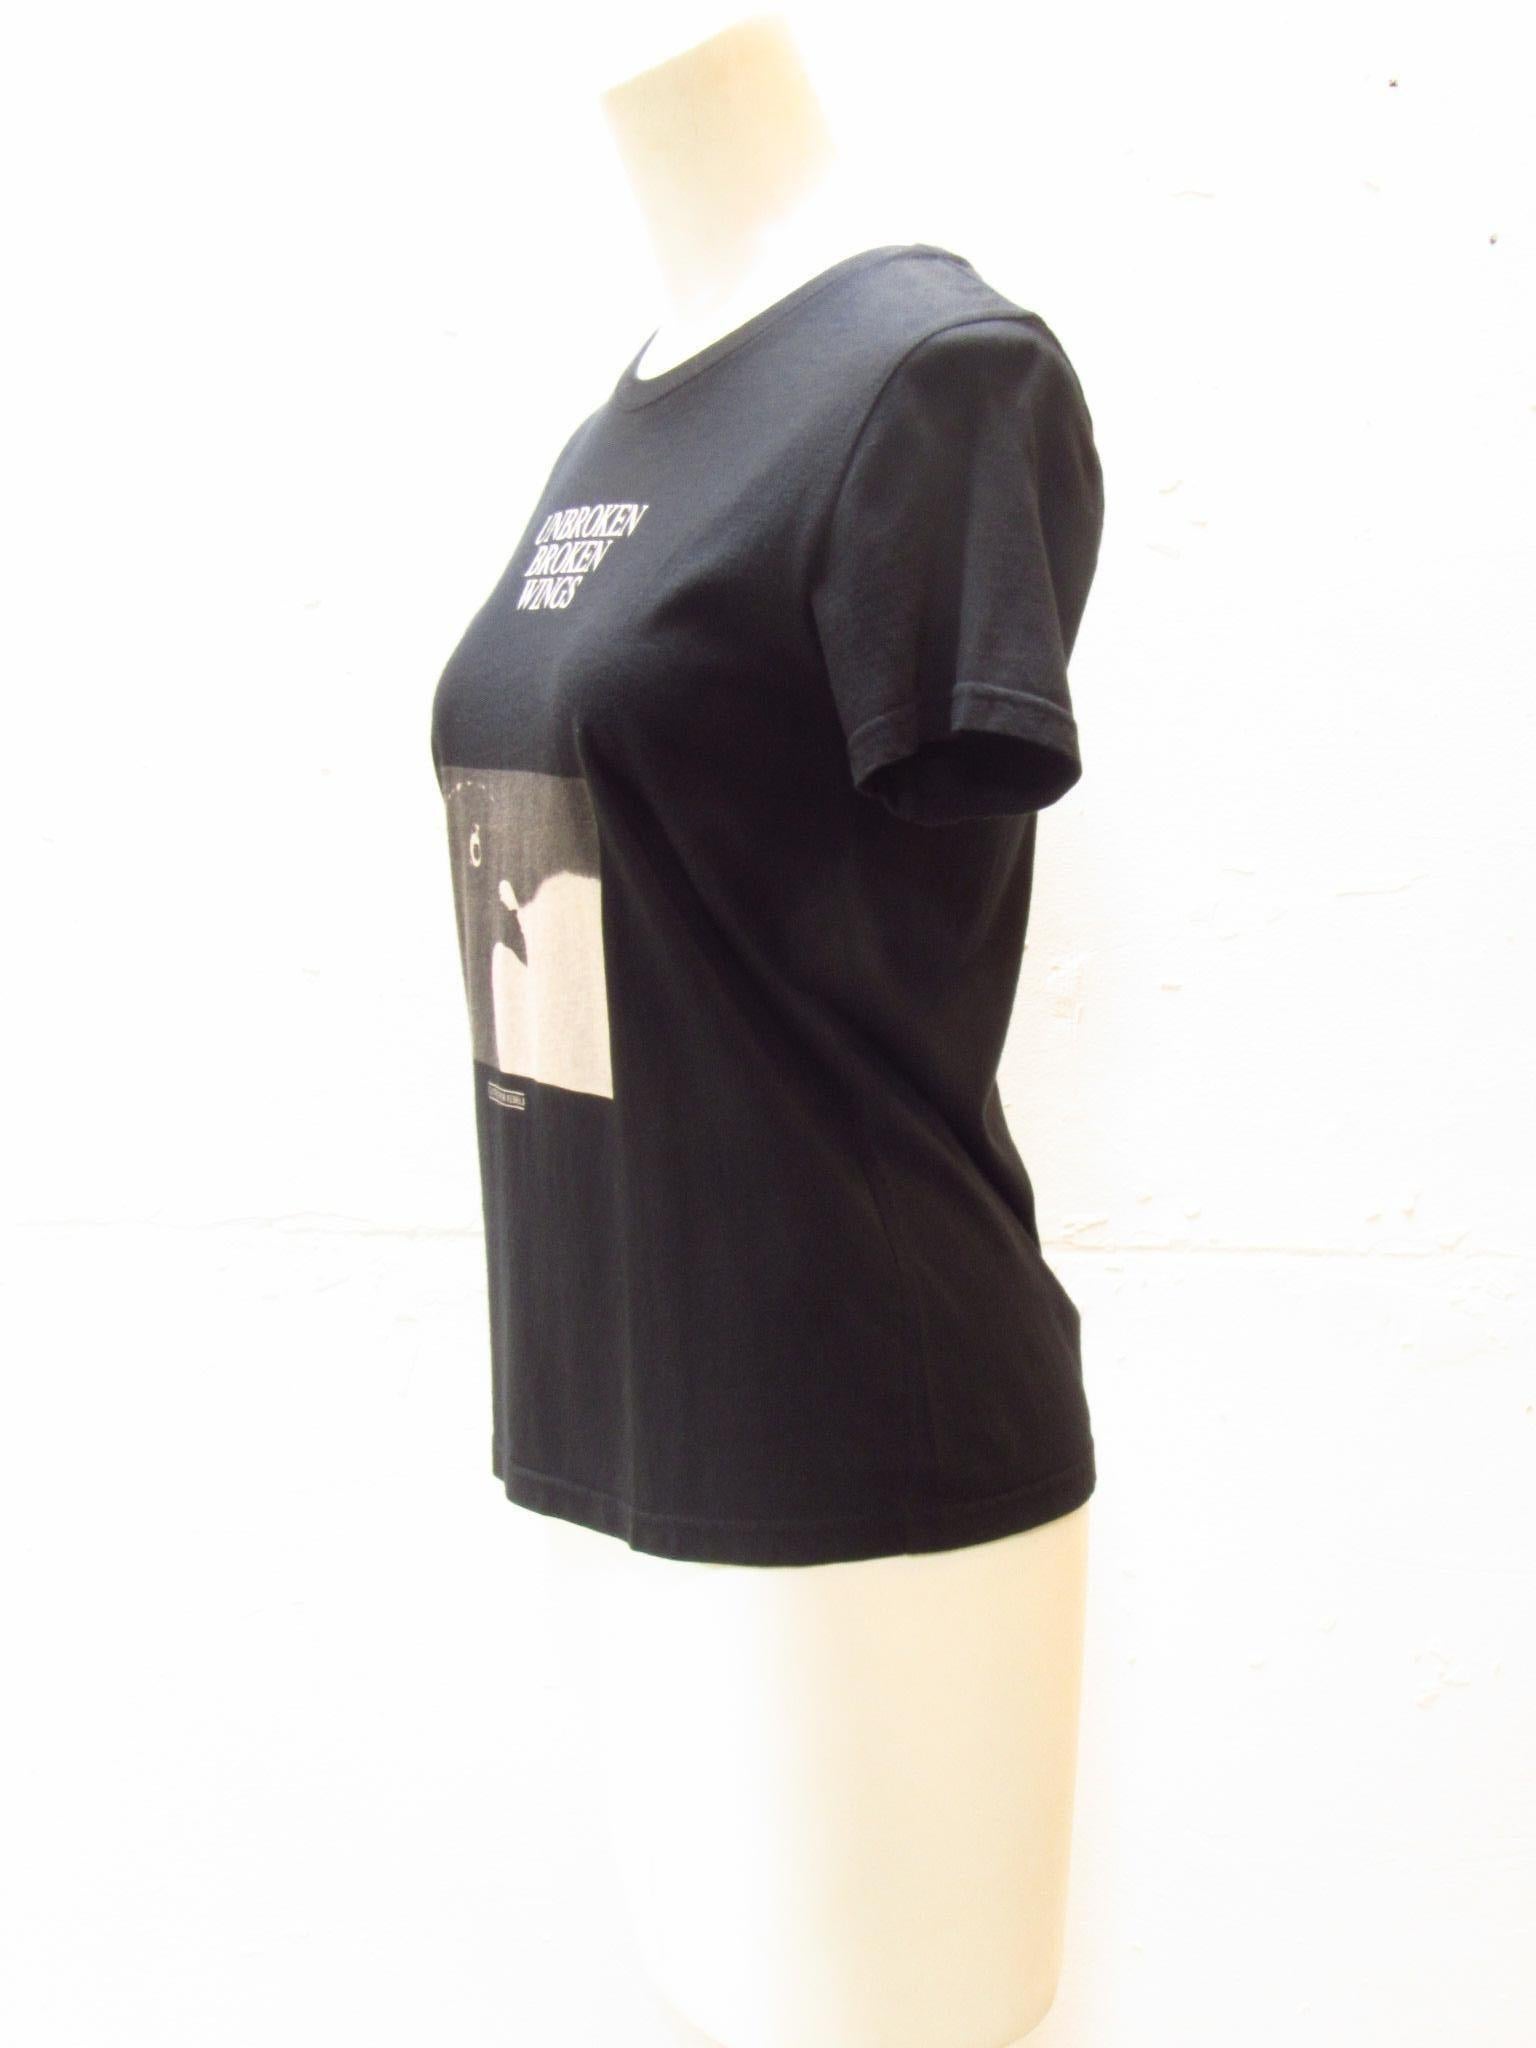 Vintage 100% Cotton Undercover tee. This basic black top features 